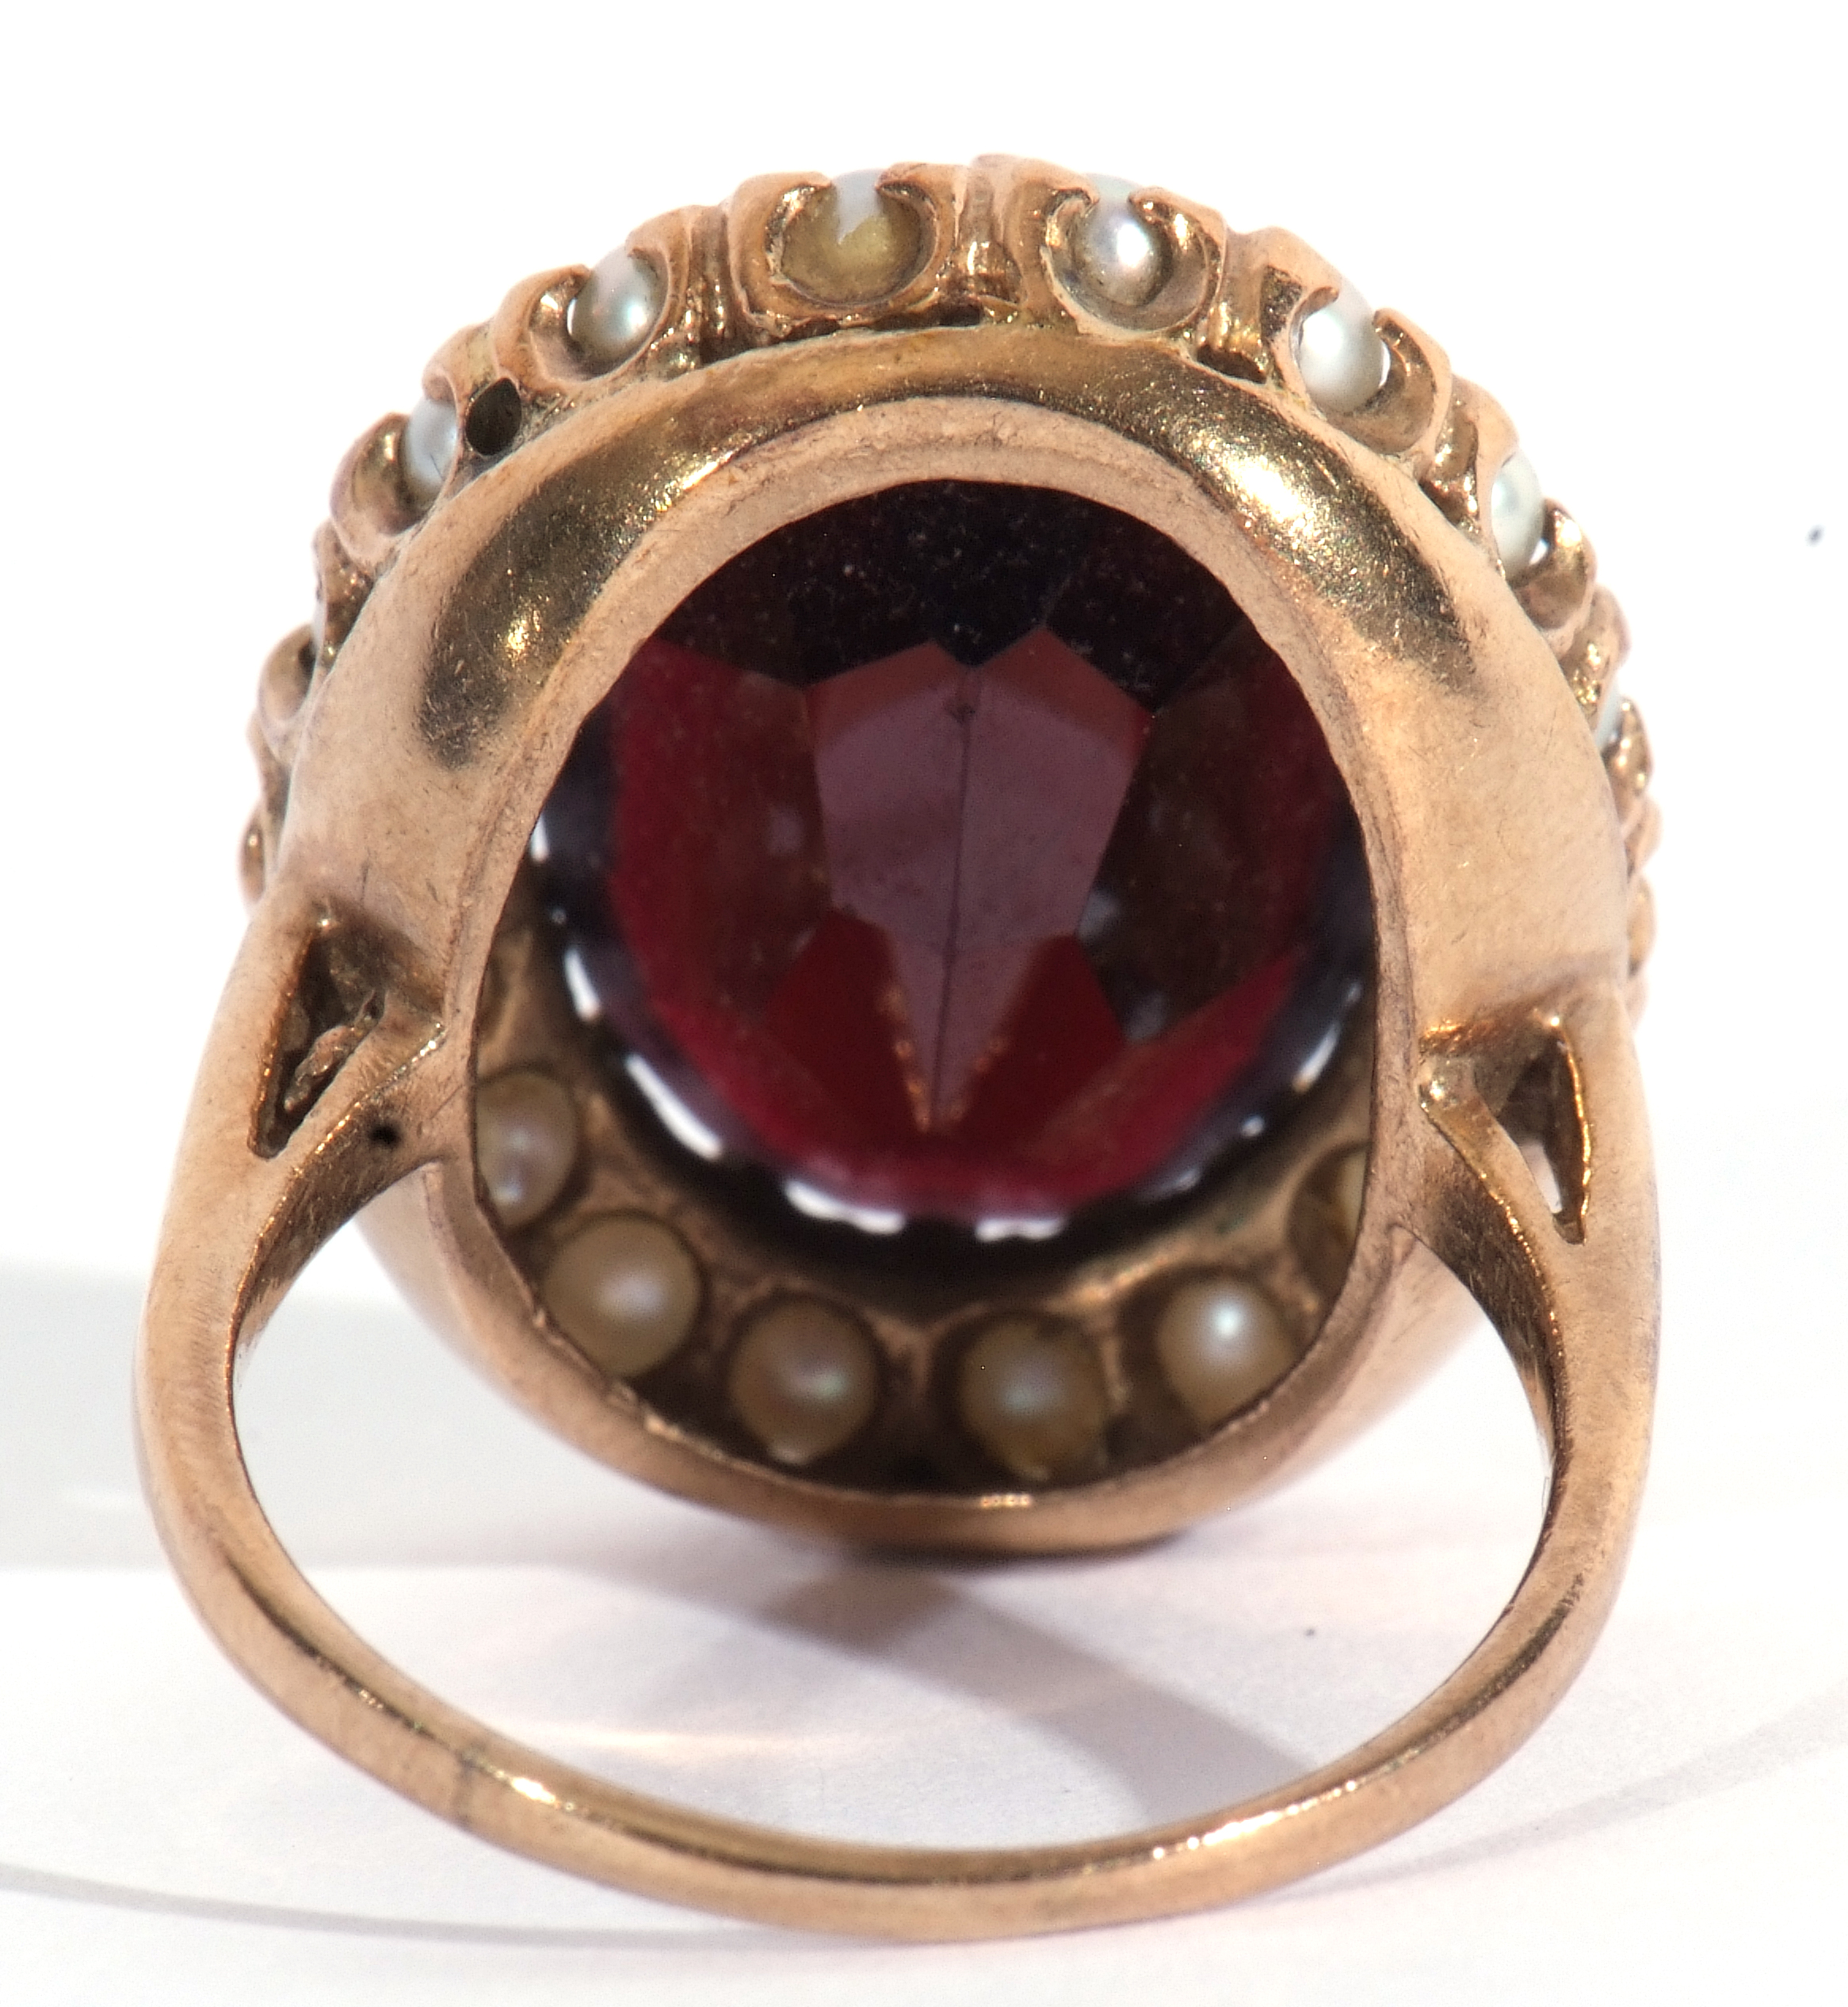 Modern 9ct gold dress ring, a large red paste faceted stone, 18 x 12mm, within a seed pearl - Image 5 of 9